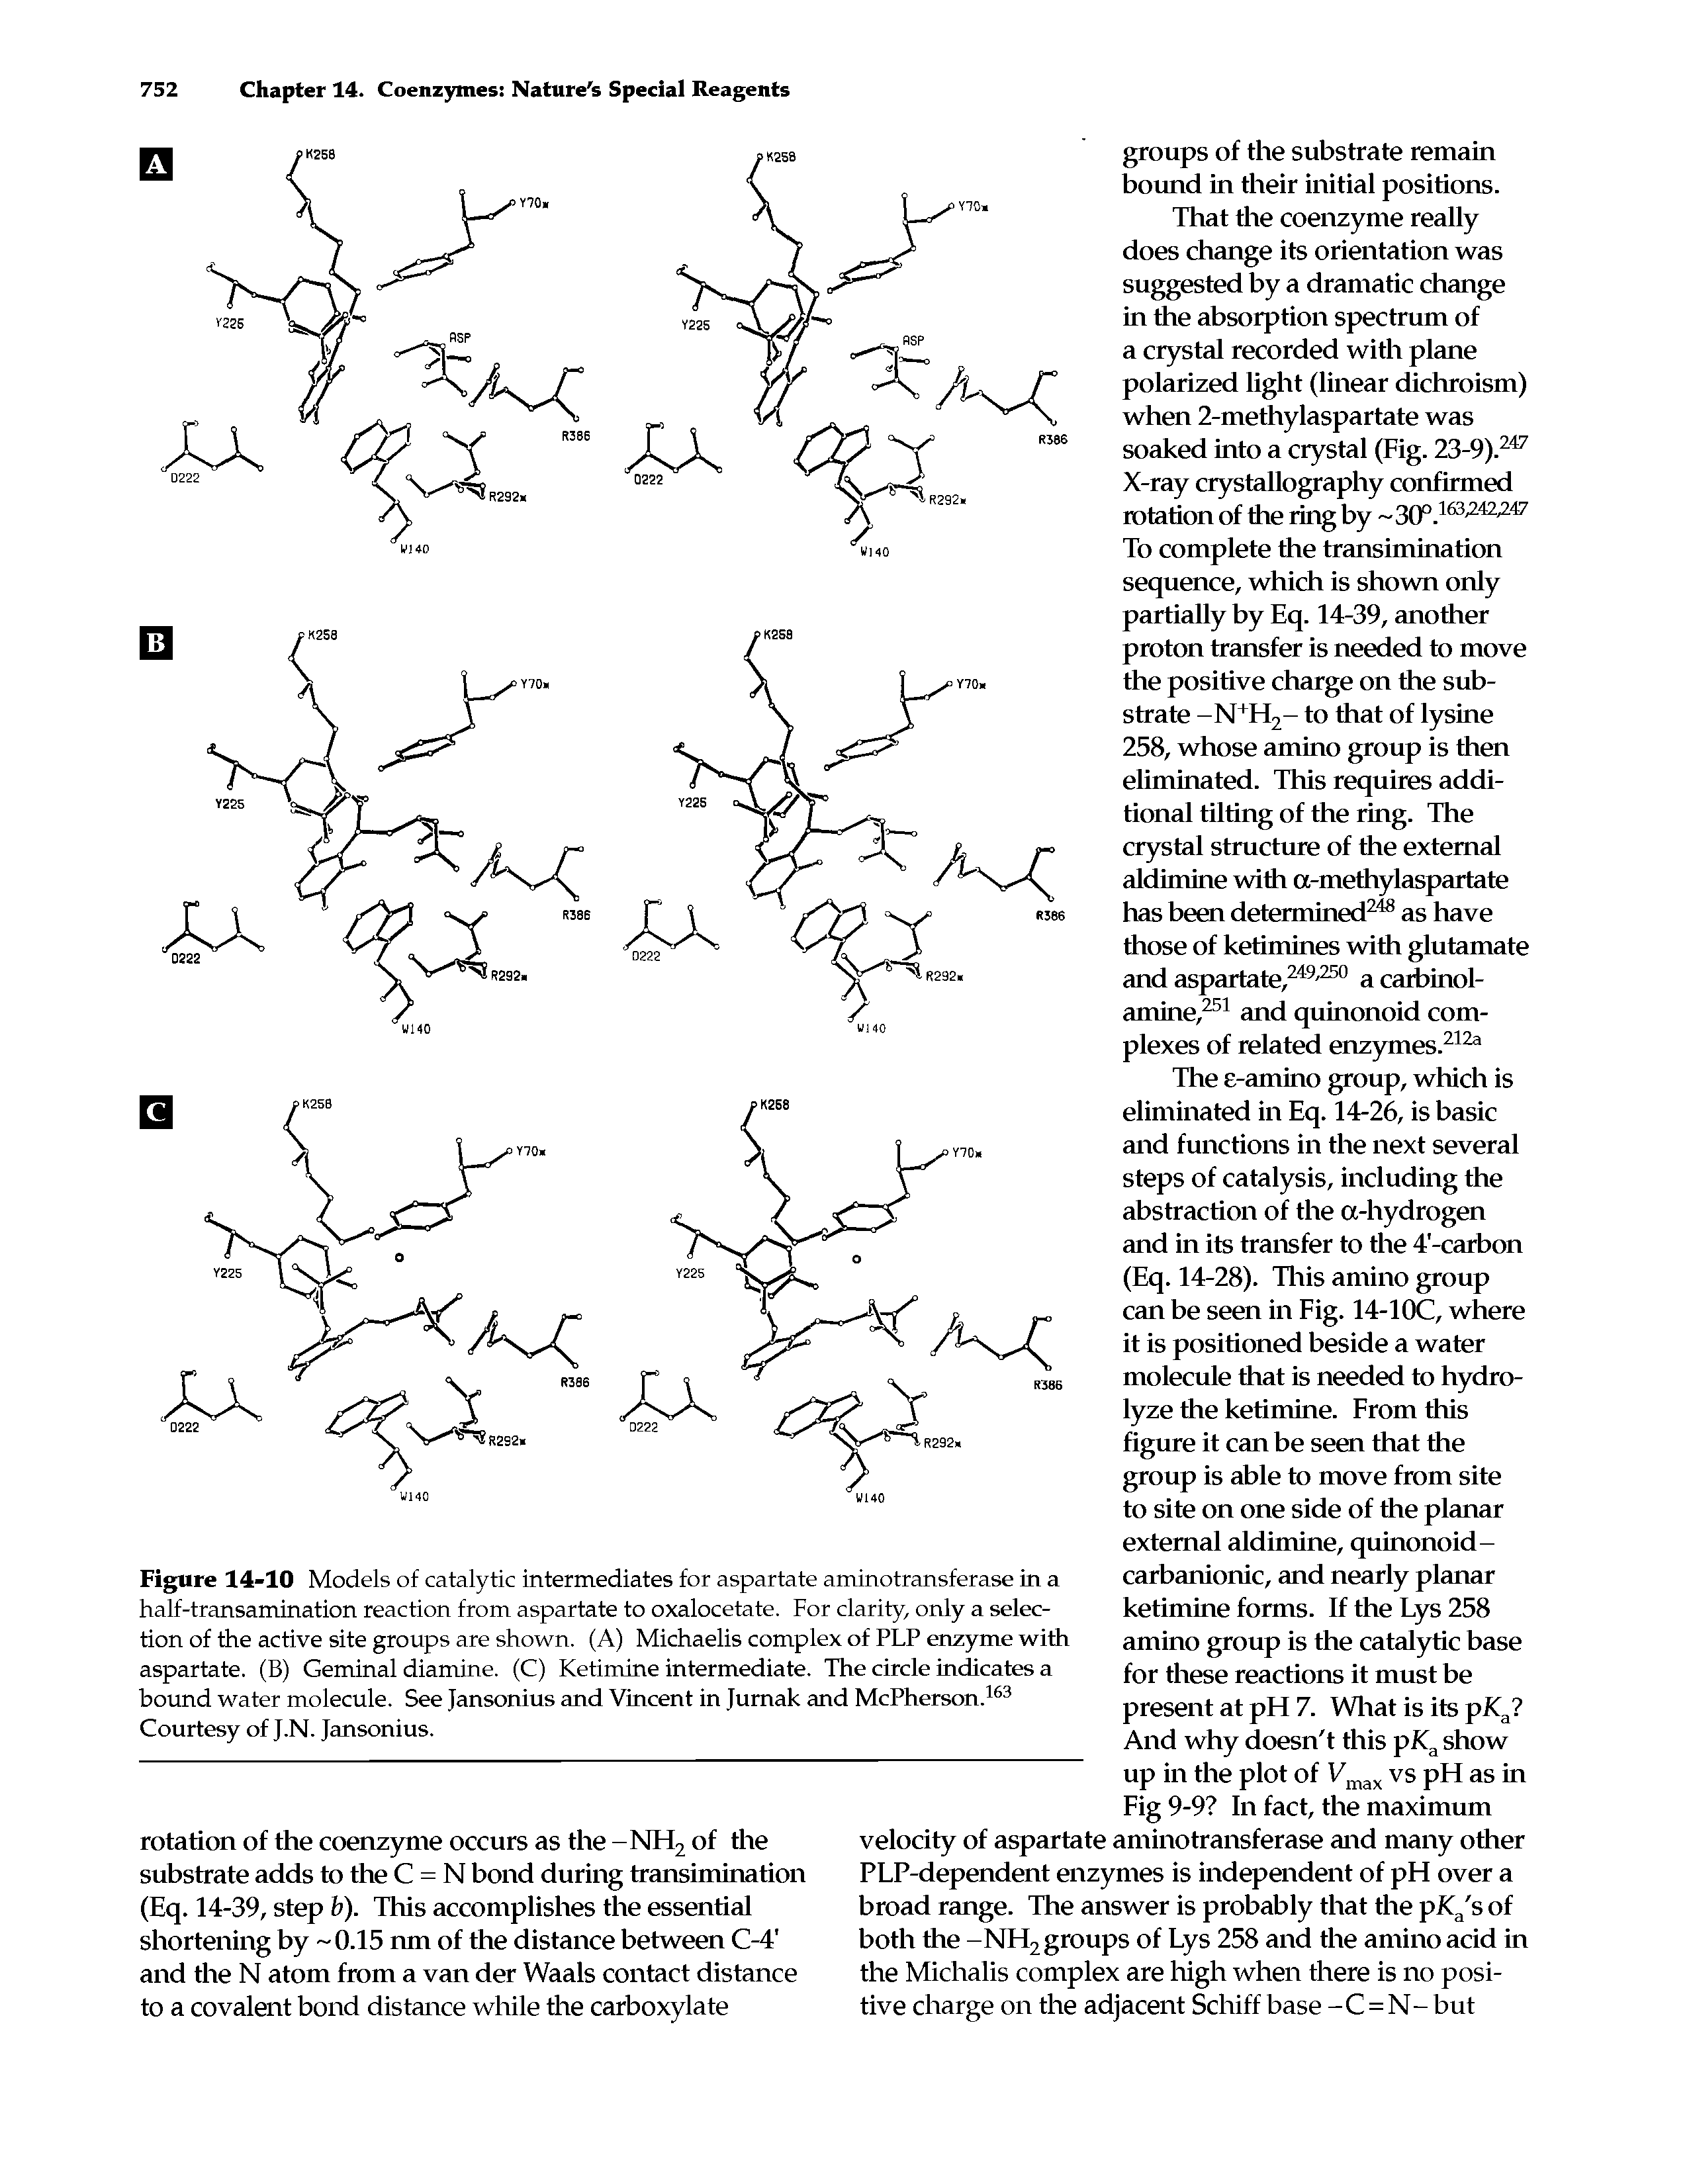 Figure 14-10 Models of catalytic intermediates for aspartate aminotransferase in a half-transamination reaction from aspartate to oxalocetate. For clarity, only a selection of the active site groups are shown. (A) Michaelis complex of PLP enzyme with aspartate. (B) Geminal diamine. (C) Ketimine intermediate. The circle indicates a bound water molecule. See Jansonius and Vincent in Jurnak and McPherson.163 Courtesy of J.N. Jansonius.